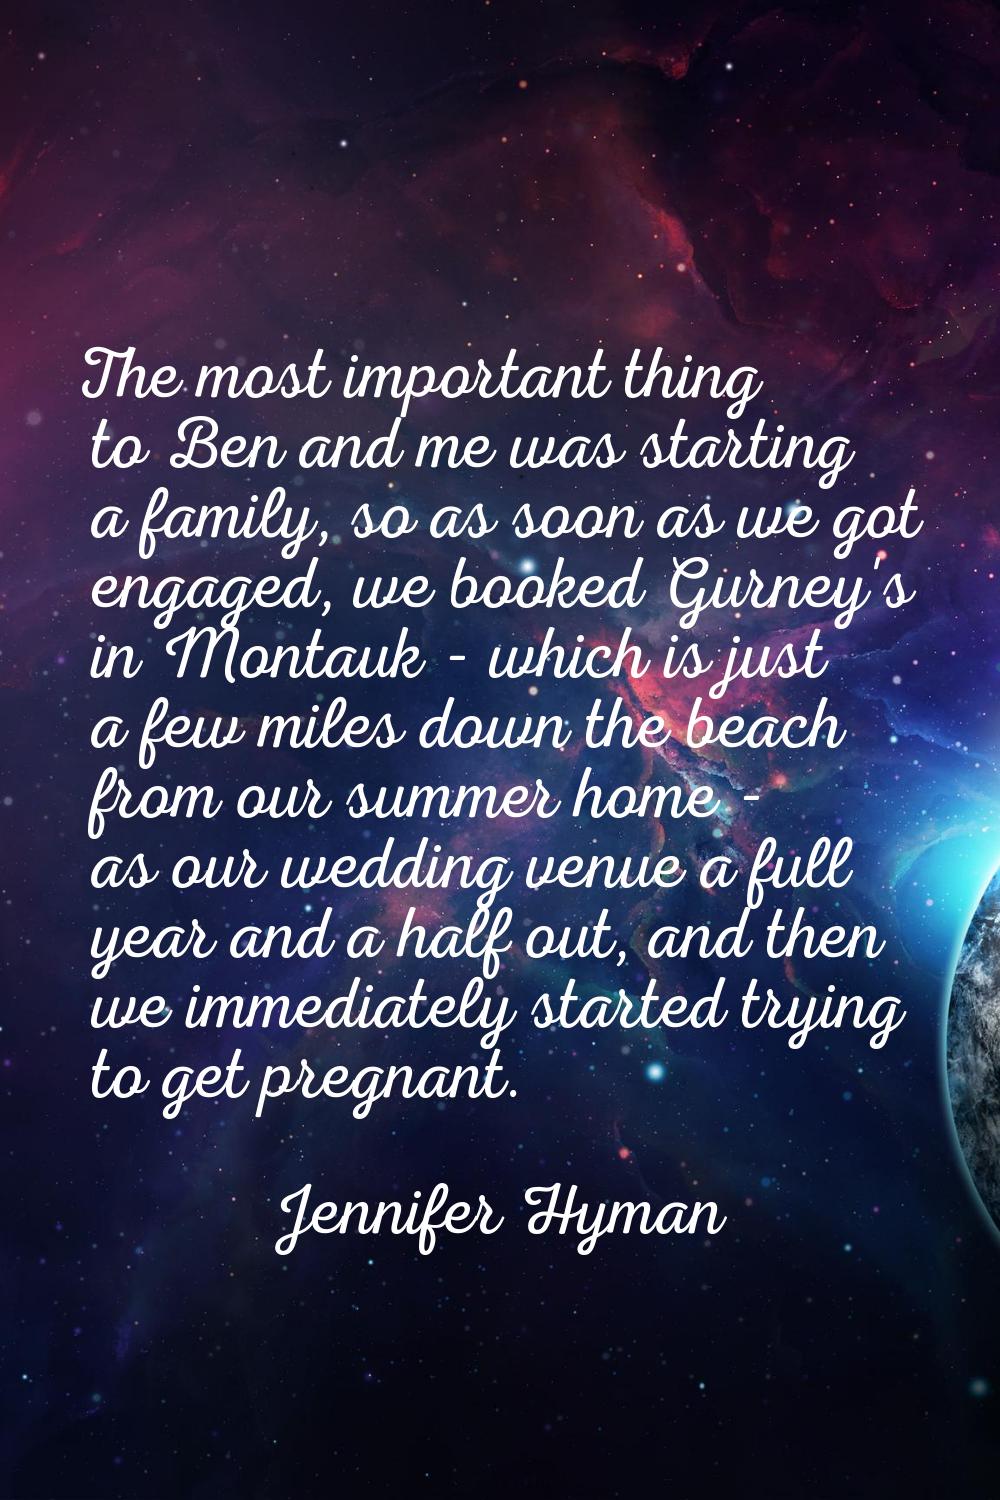 The most important thing to Ben and me was starting a family, so as soon as we got engaged, we book